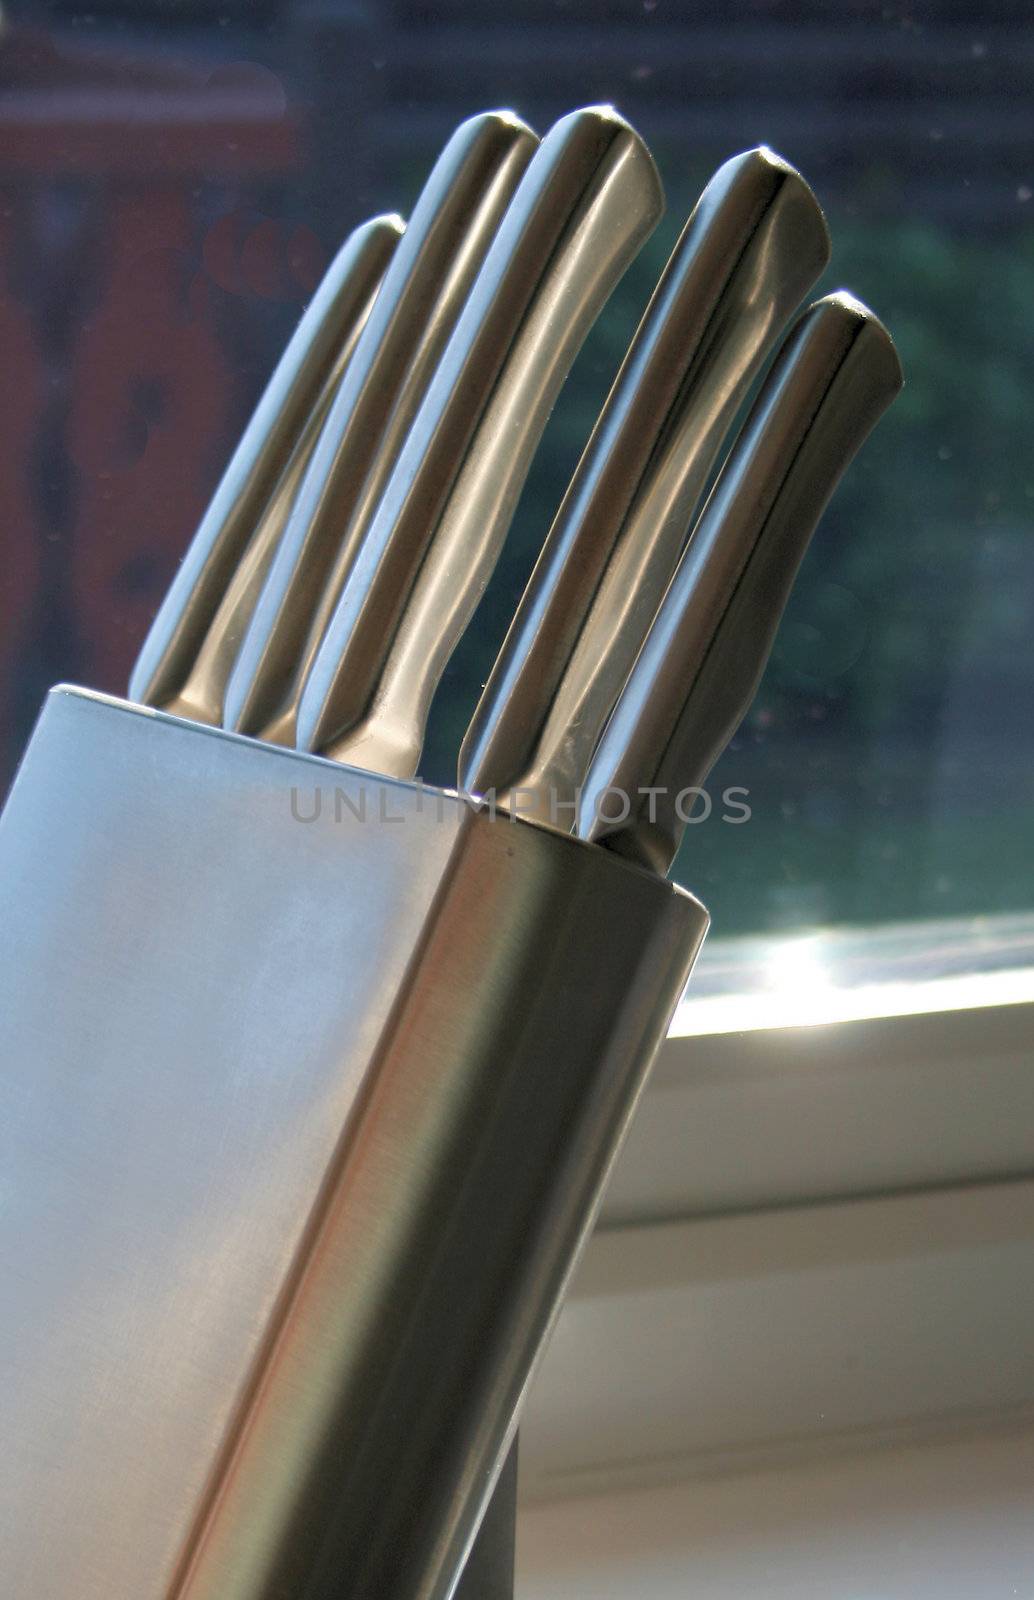 stainless steel knives by leafy